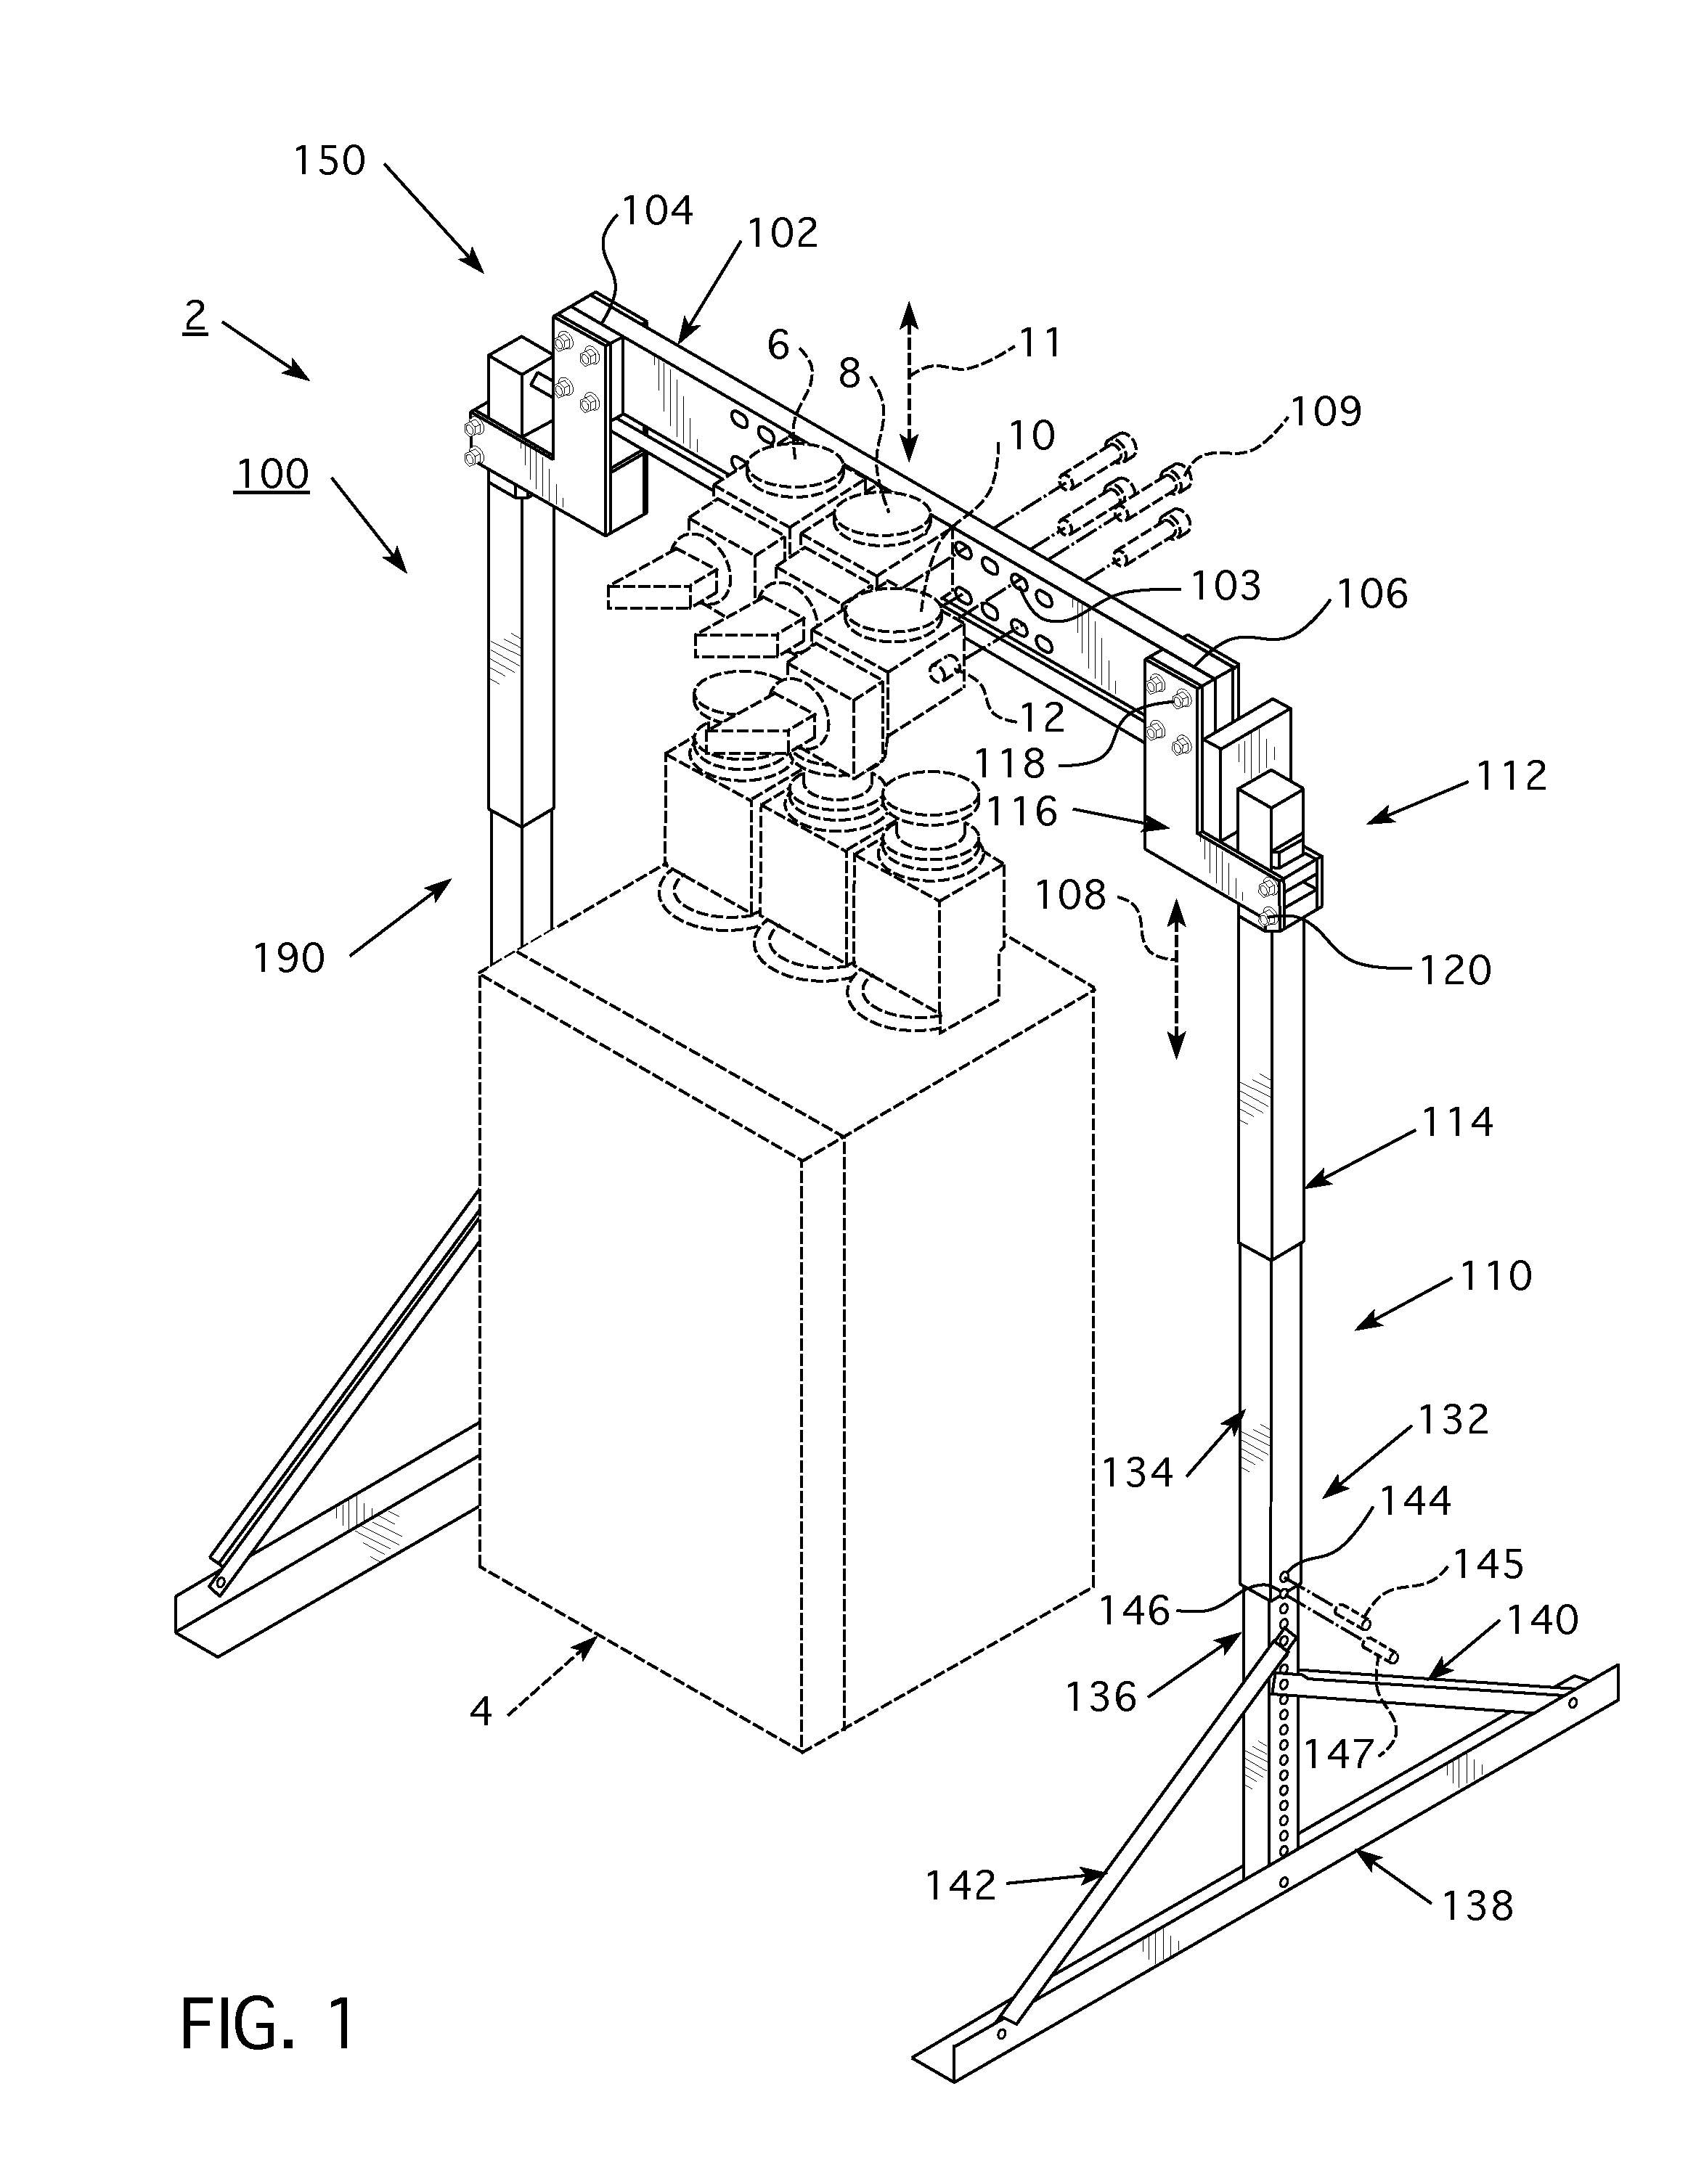 Electrical system and support assembly therefor